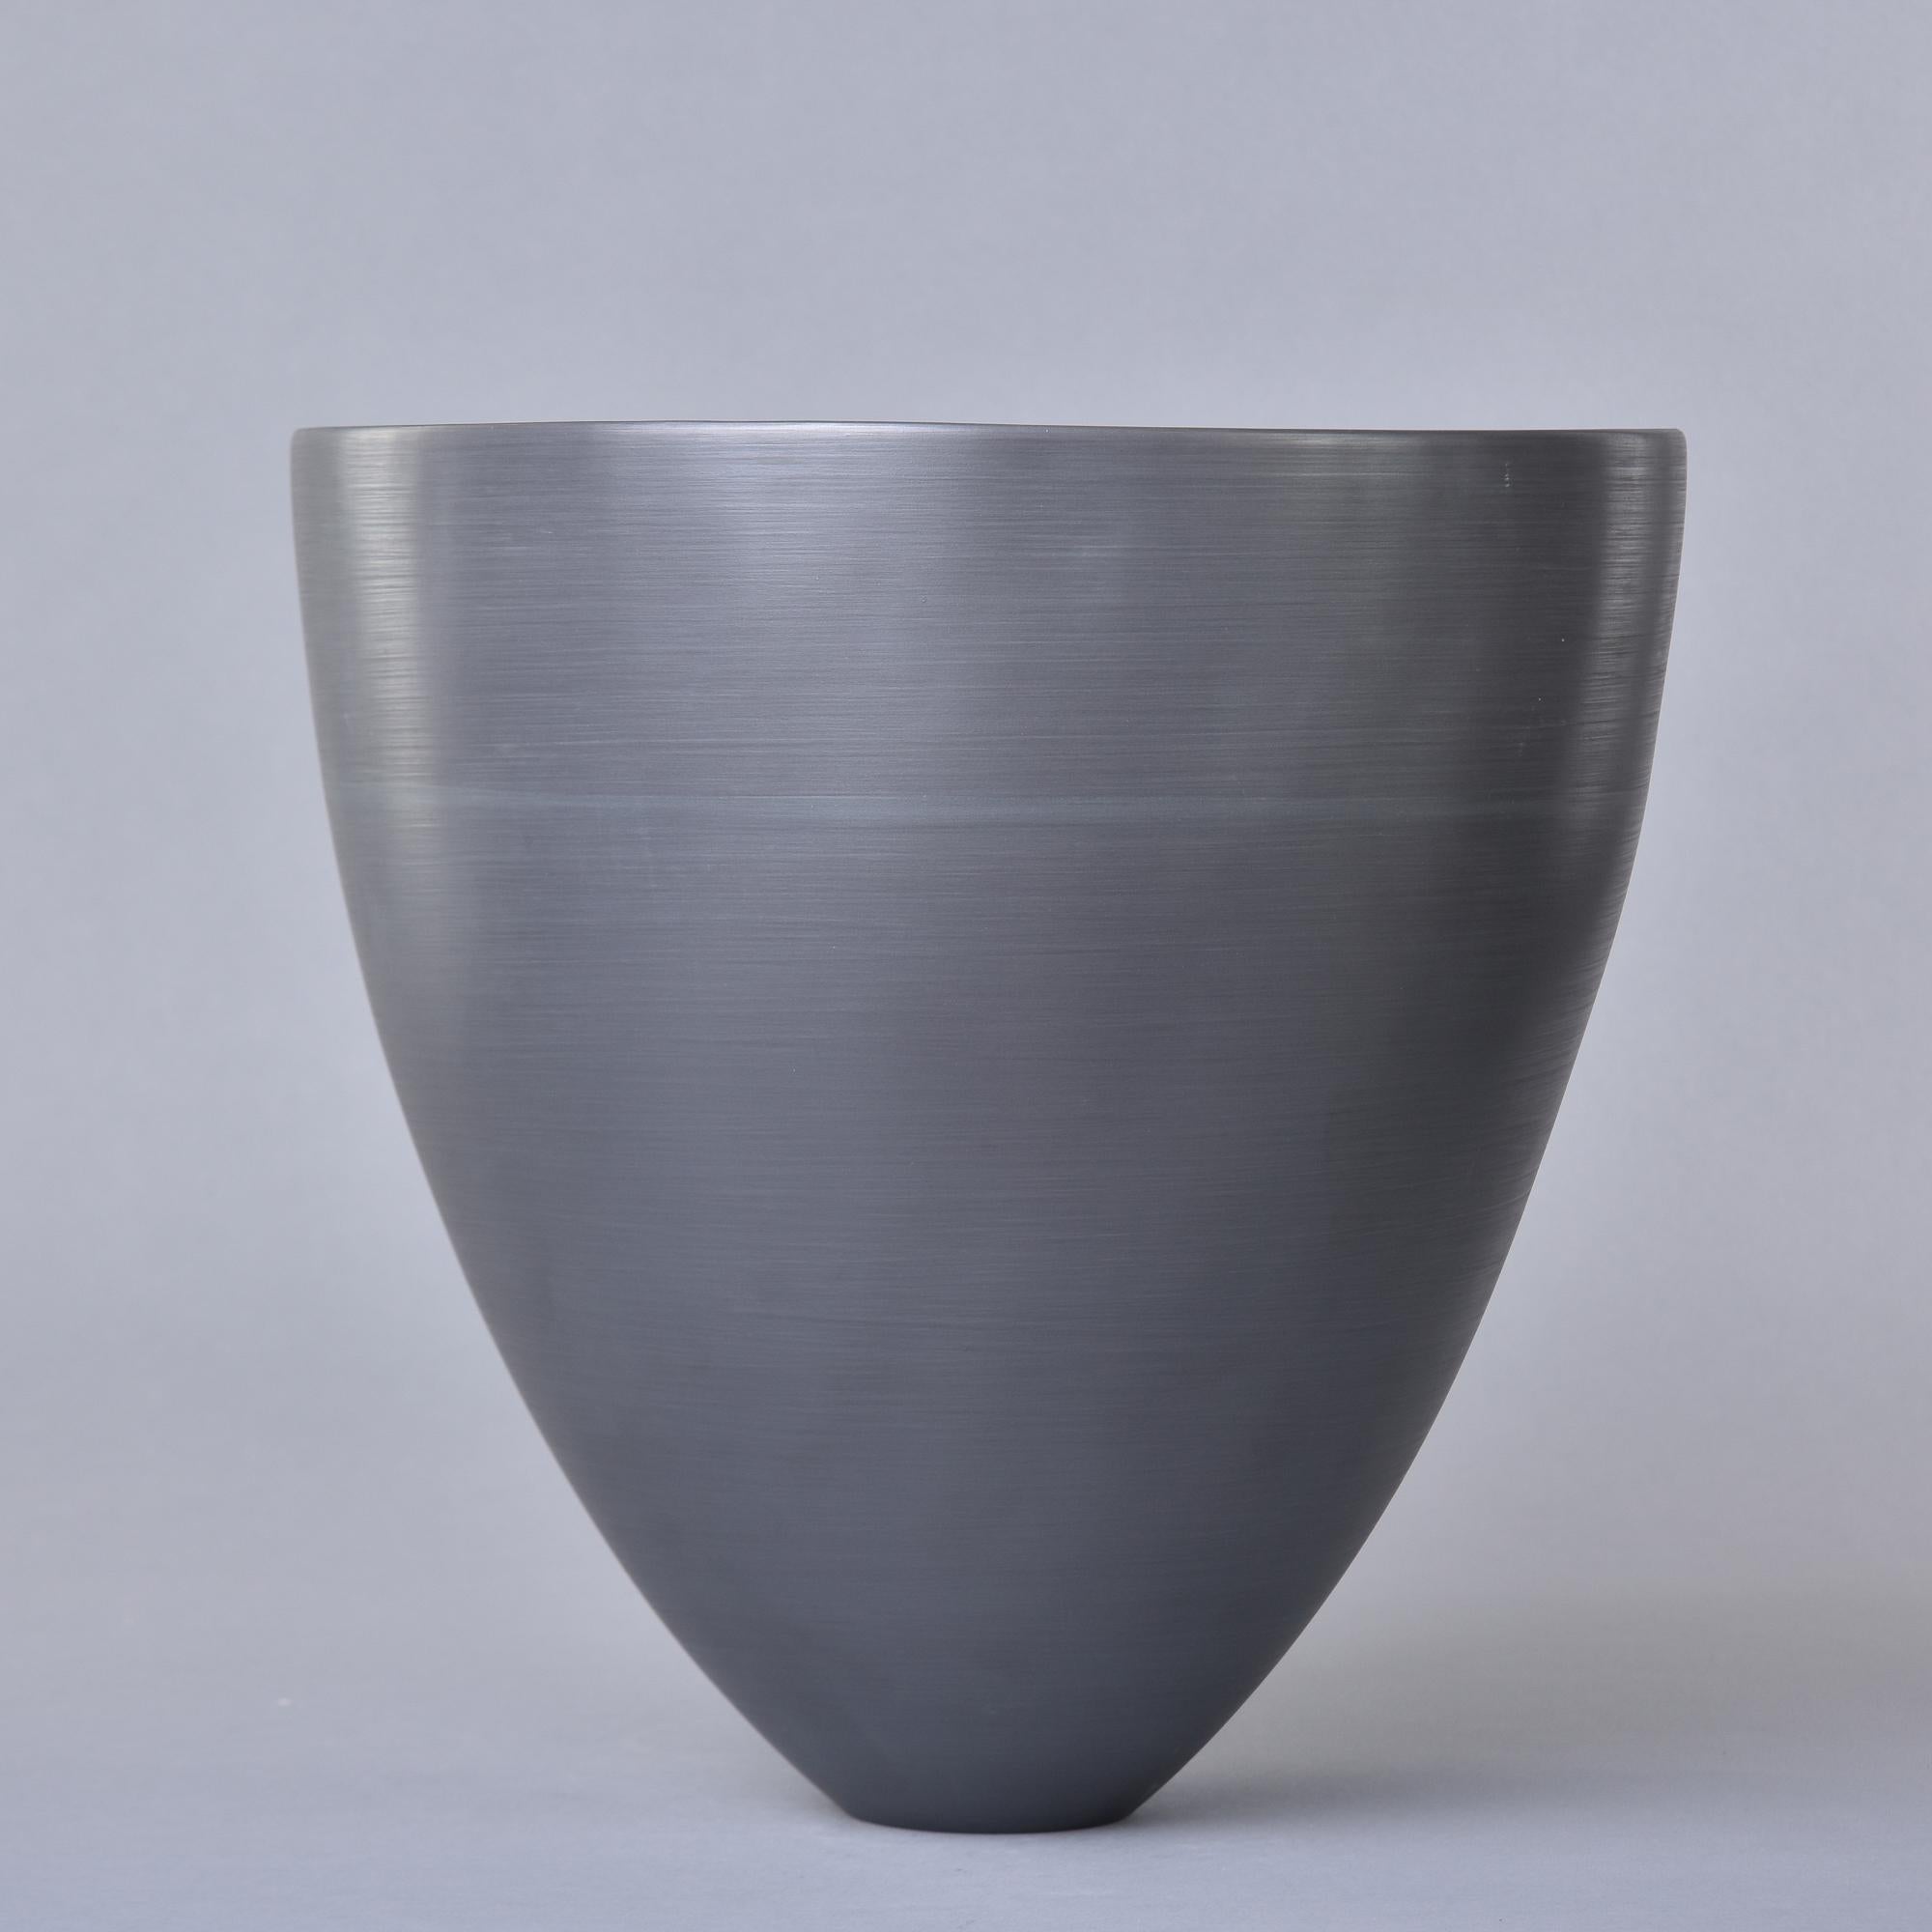 New Rina Menardi Large Cup Form Bowl or Vase in Graphite In New Condition For Sale In Troy, MI